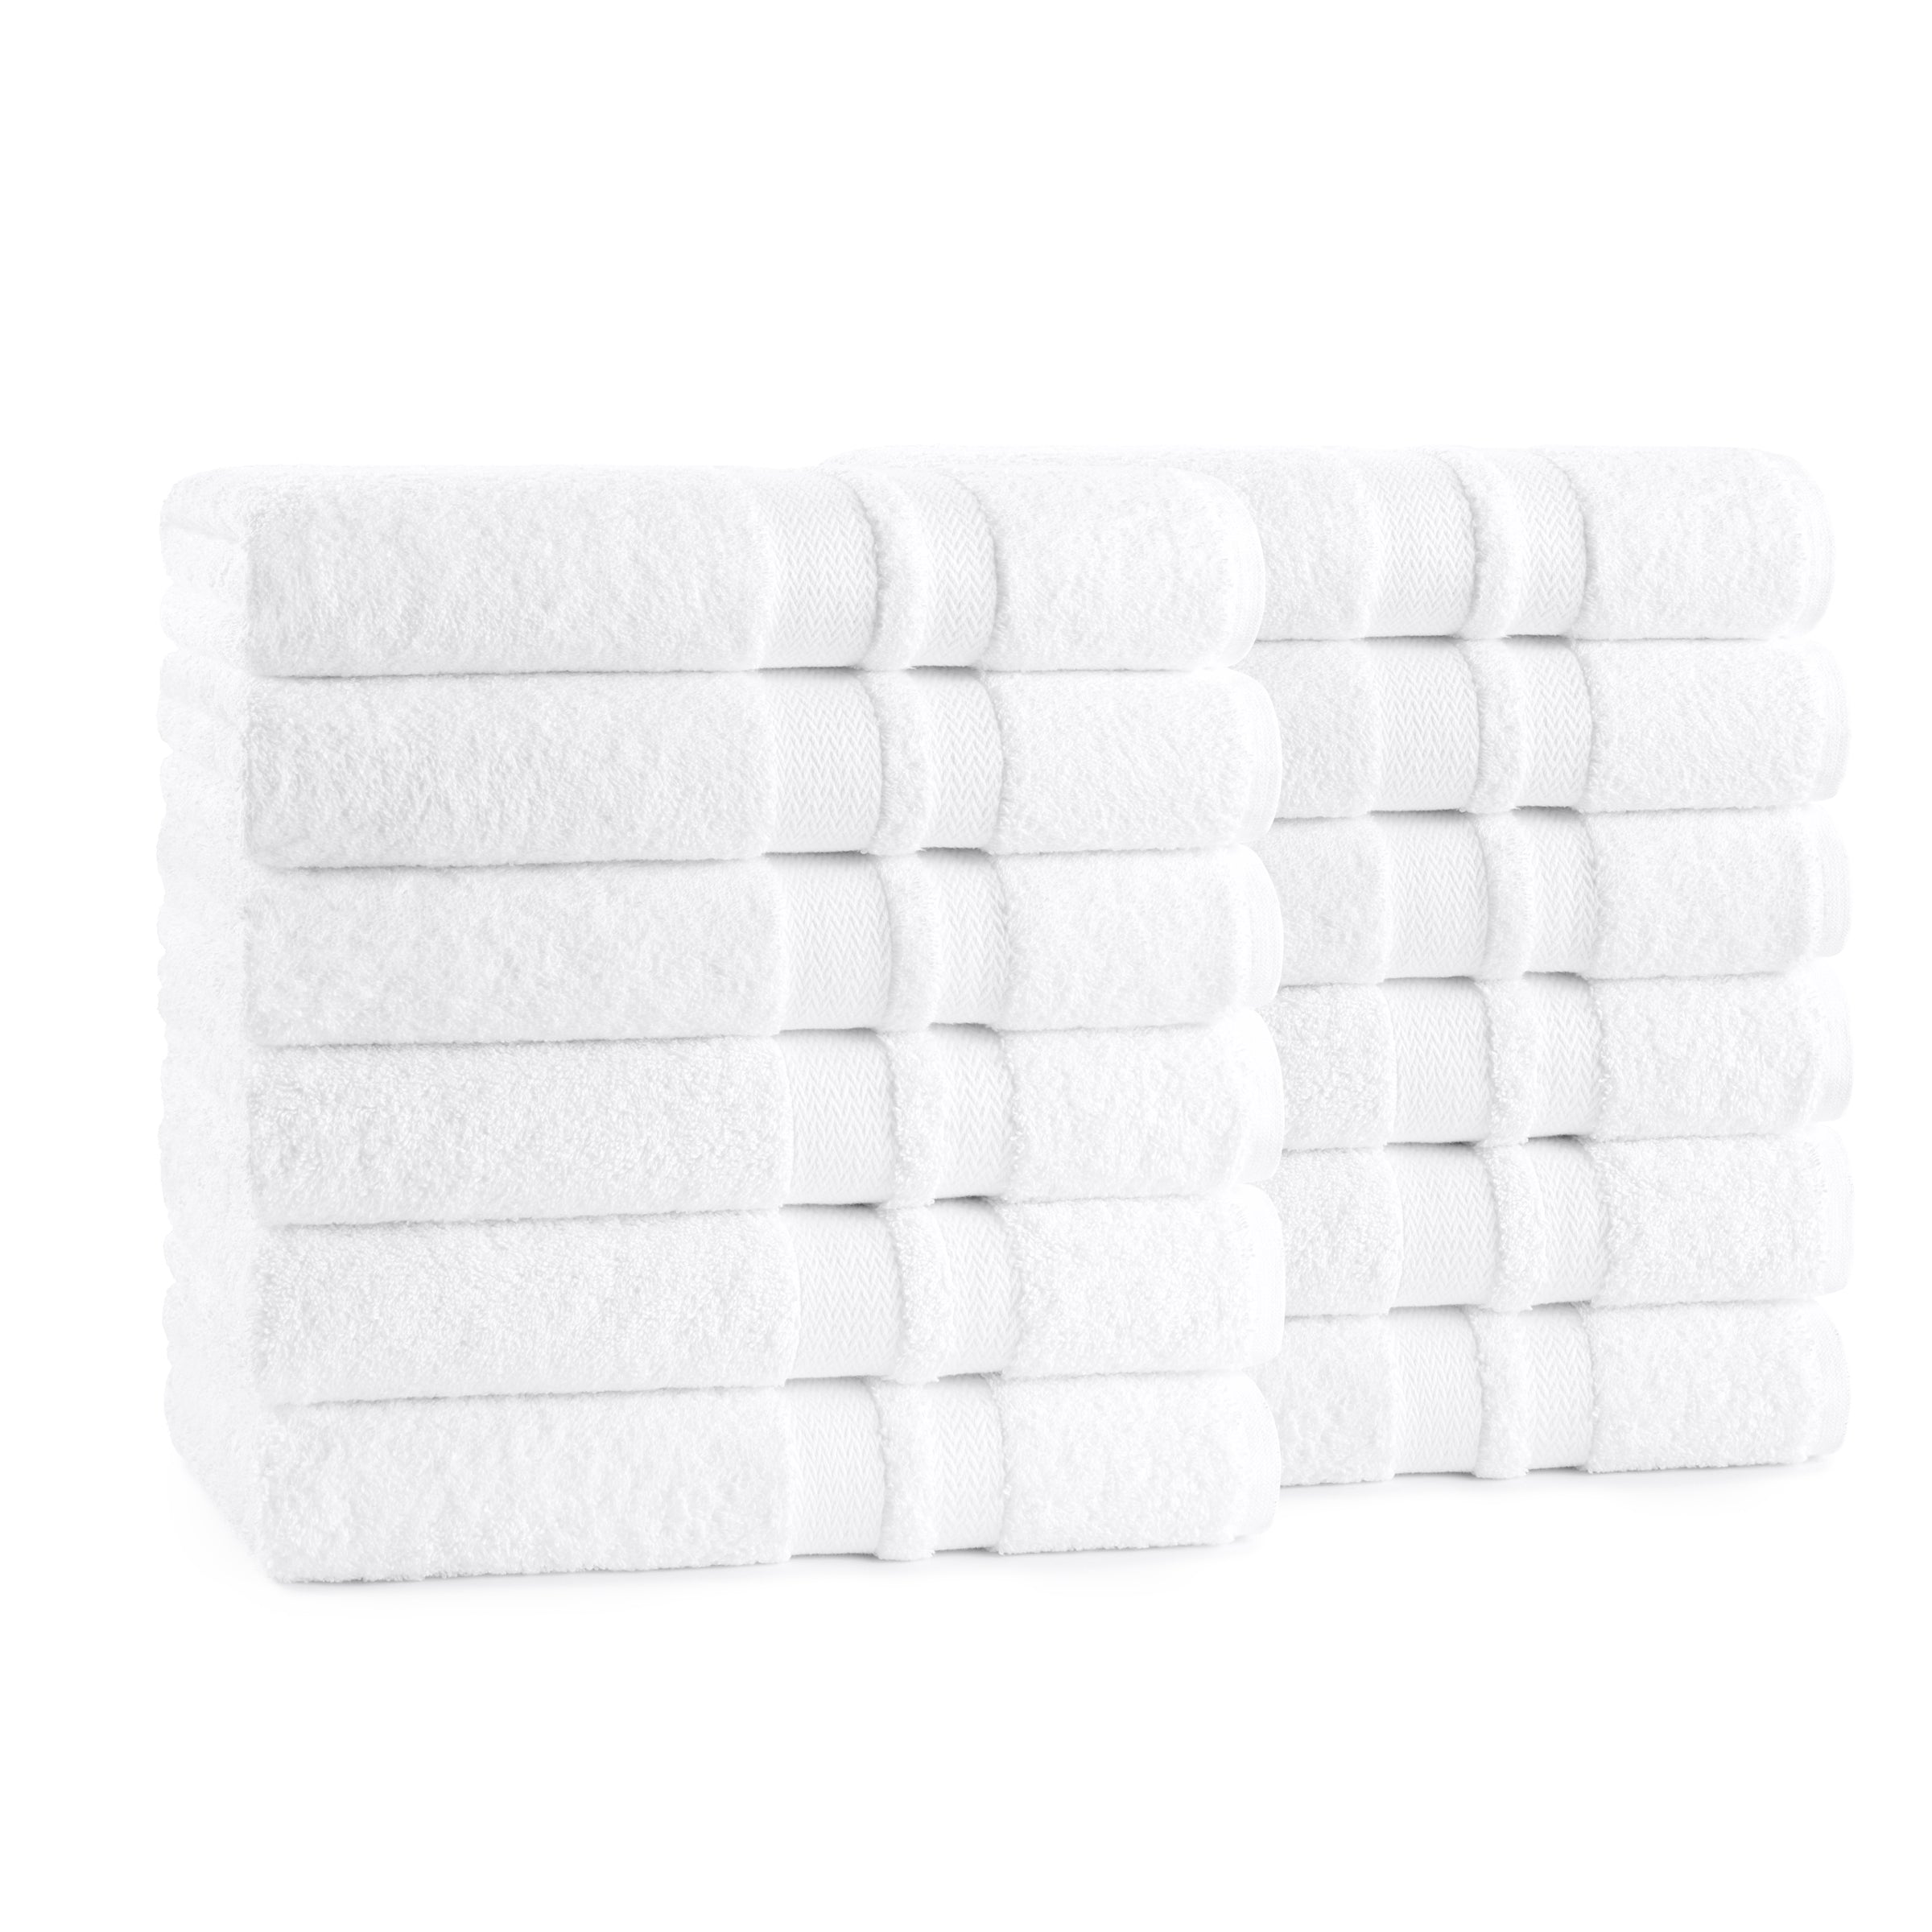 Pack of 4 Bath Towels Set 27 x 54 Inches Cotton Soft 600 GSM